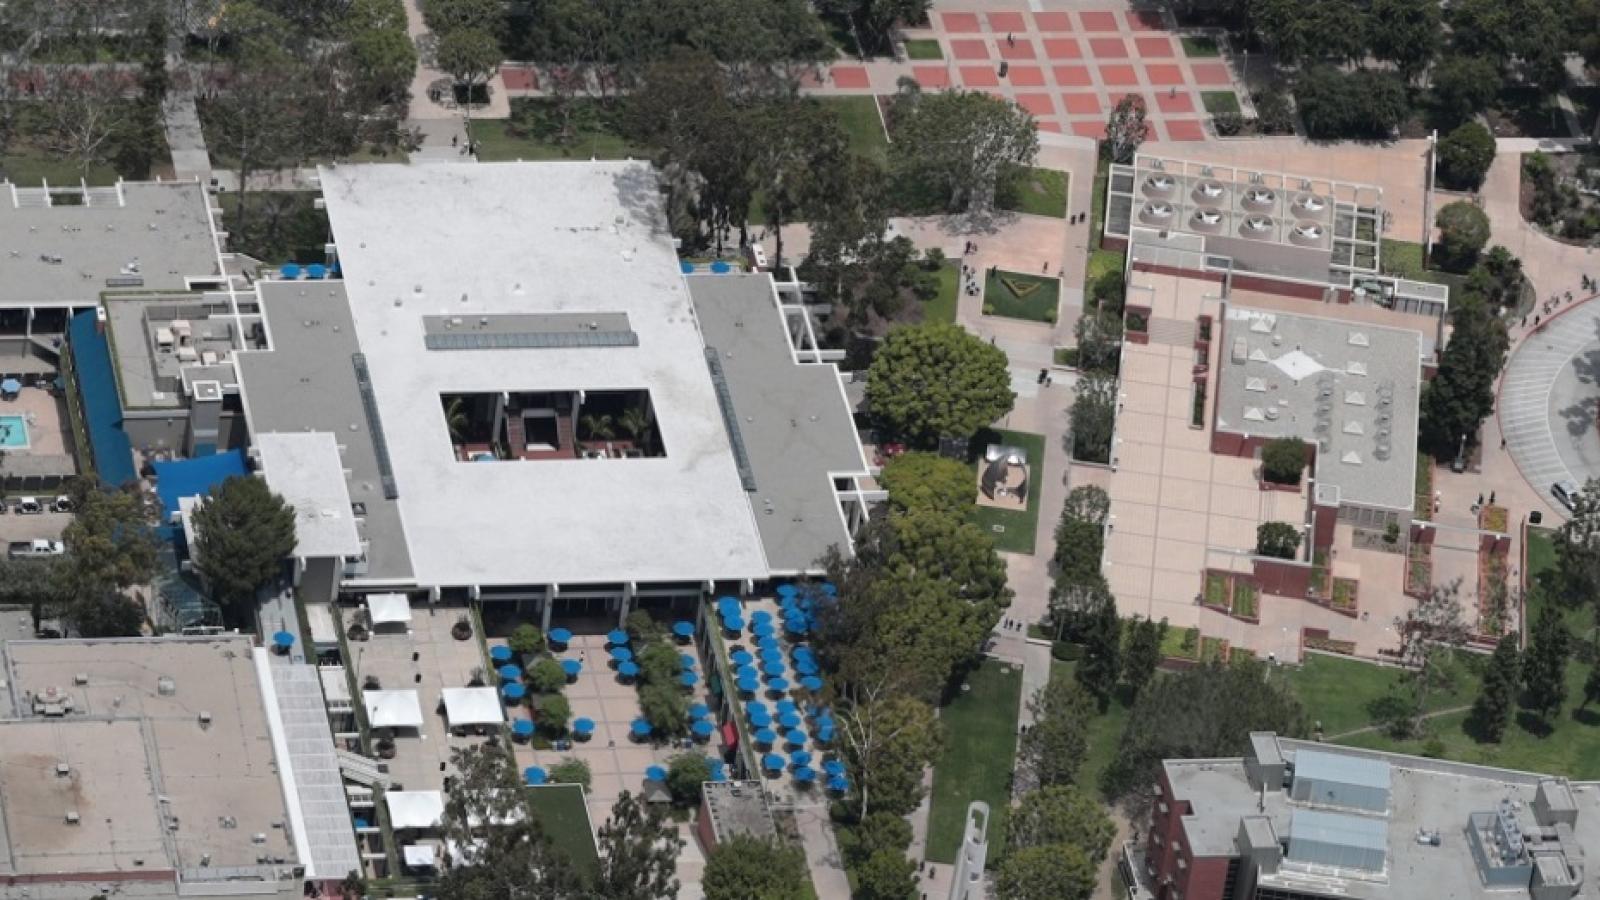 Aerial view of a section of our campus